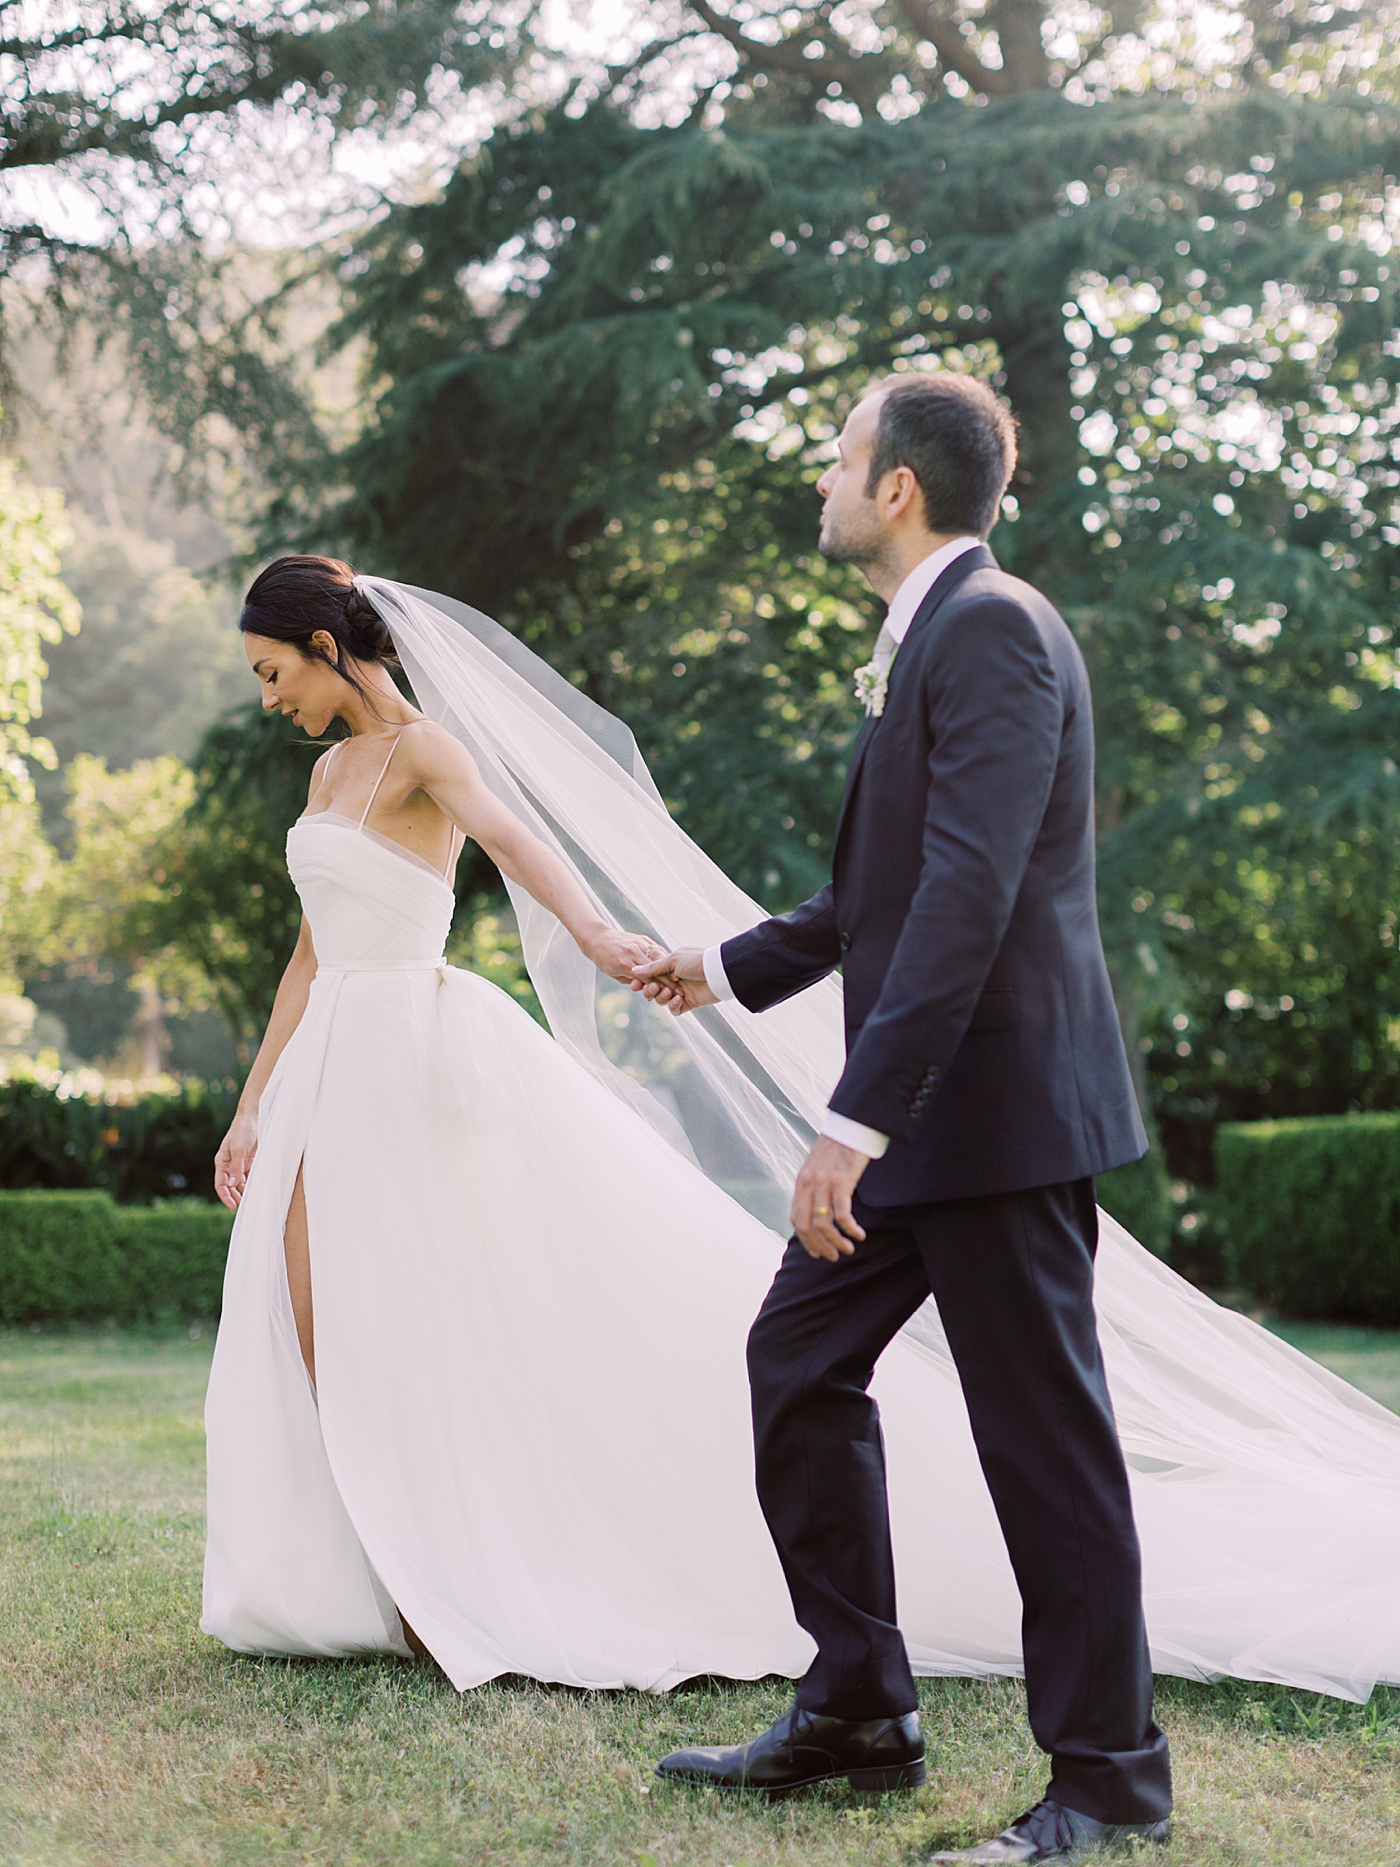 Bride and groom walking hand in hand | Image by Diane Sotero Photography